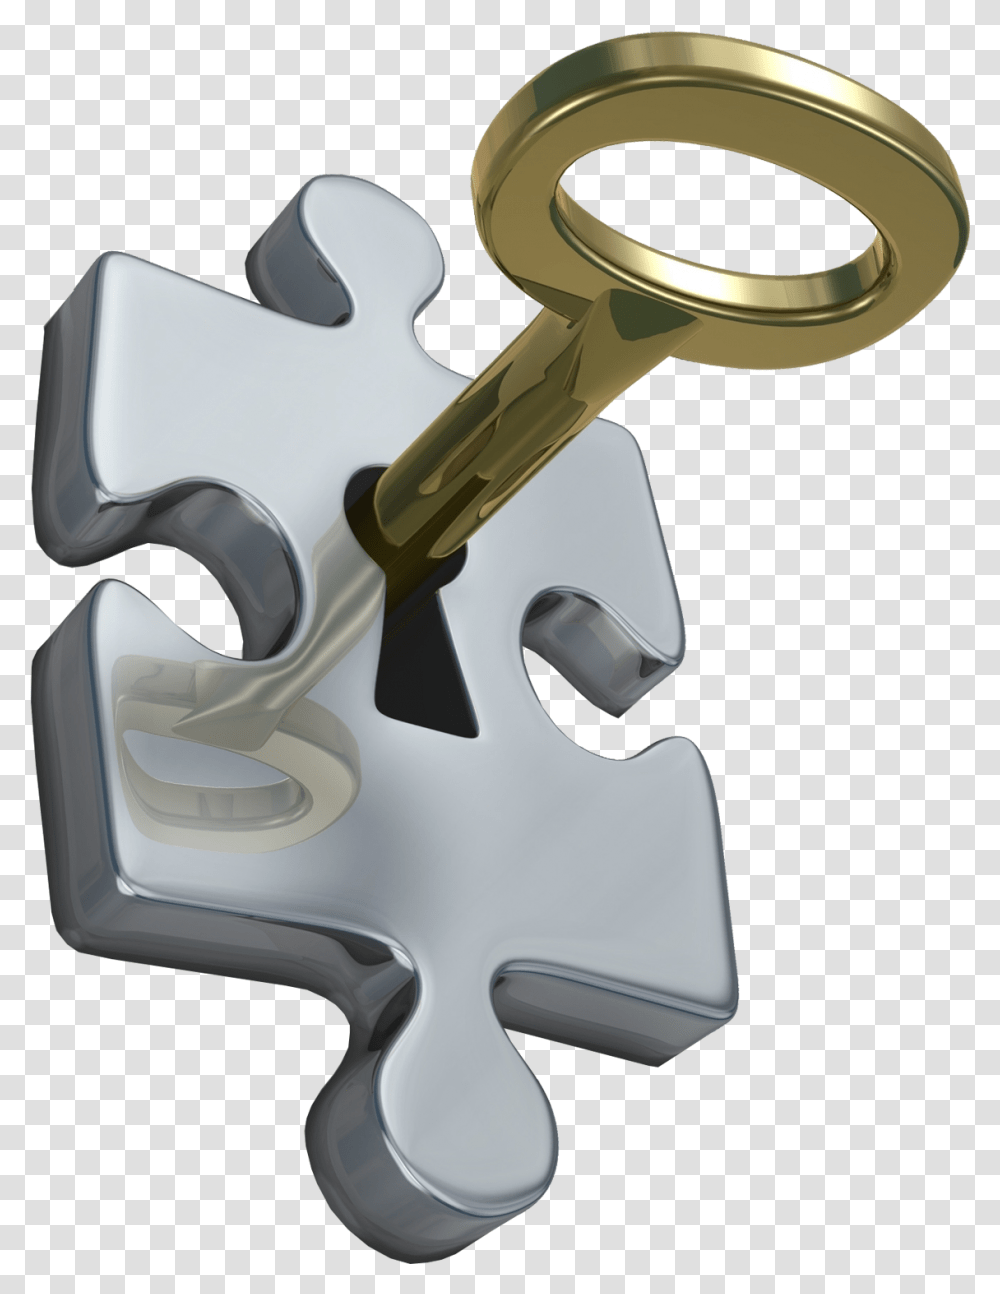 Download And Gold Keys Marketing Locks Affiliate Login Hq Marketing, Sink Faucet, Game, Jigsaw Puzzle Transparent Png